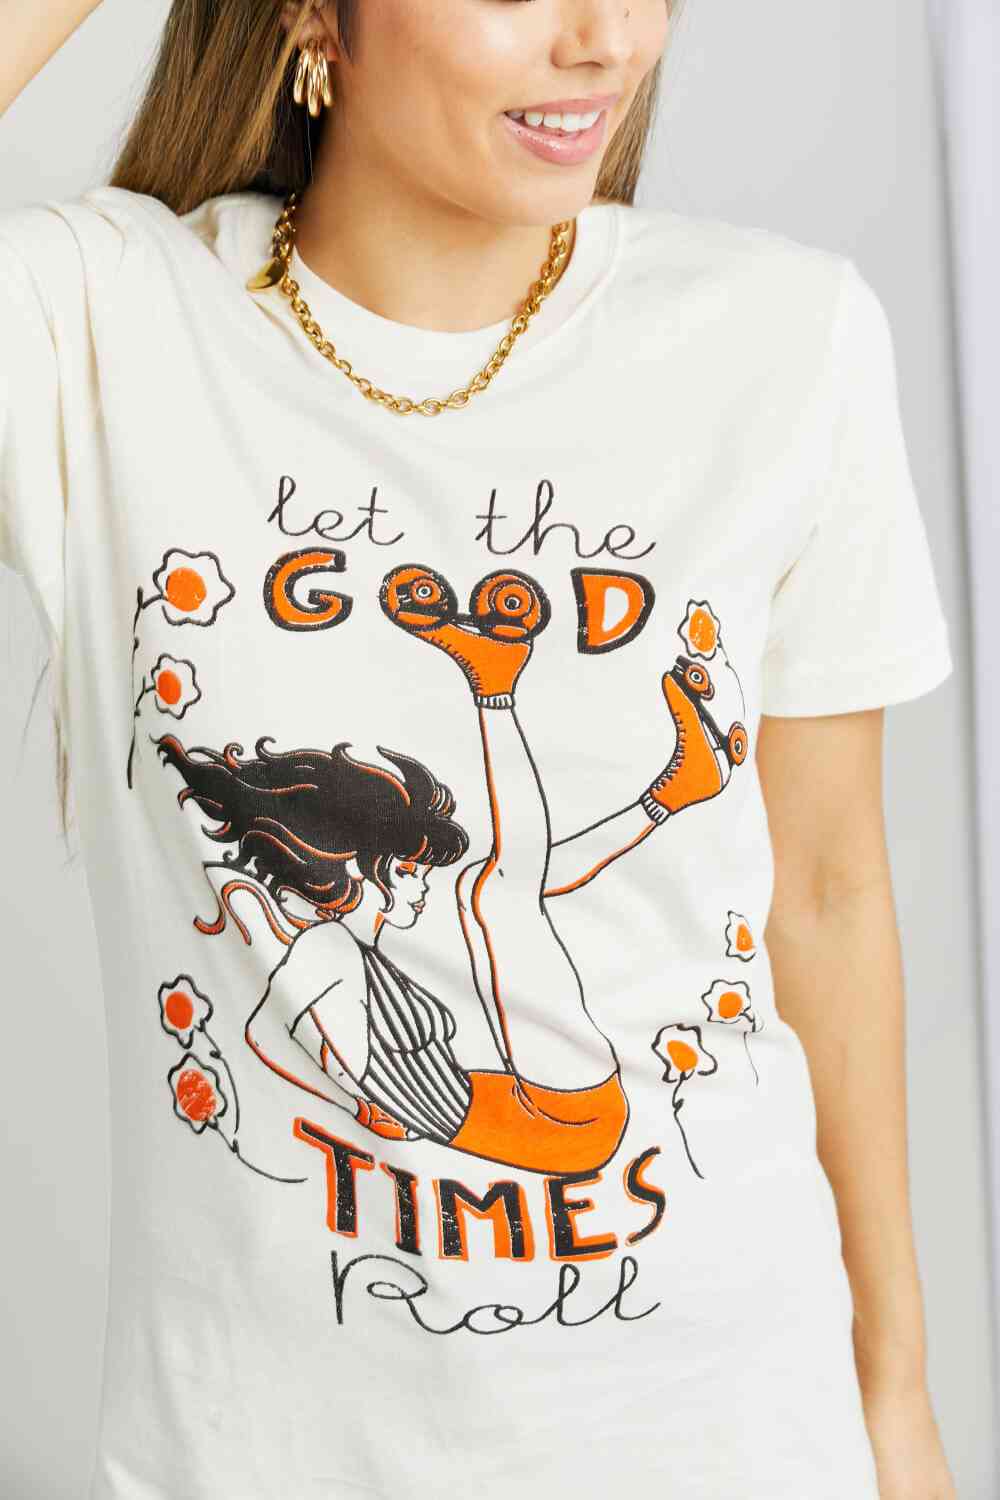 Full Size LET THE GOOD TIMES ROLL Graphic Tee